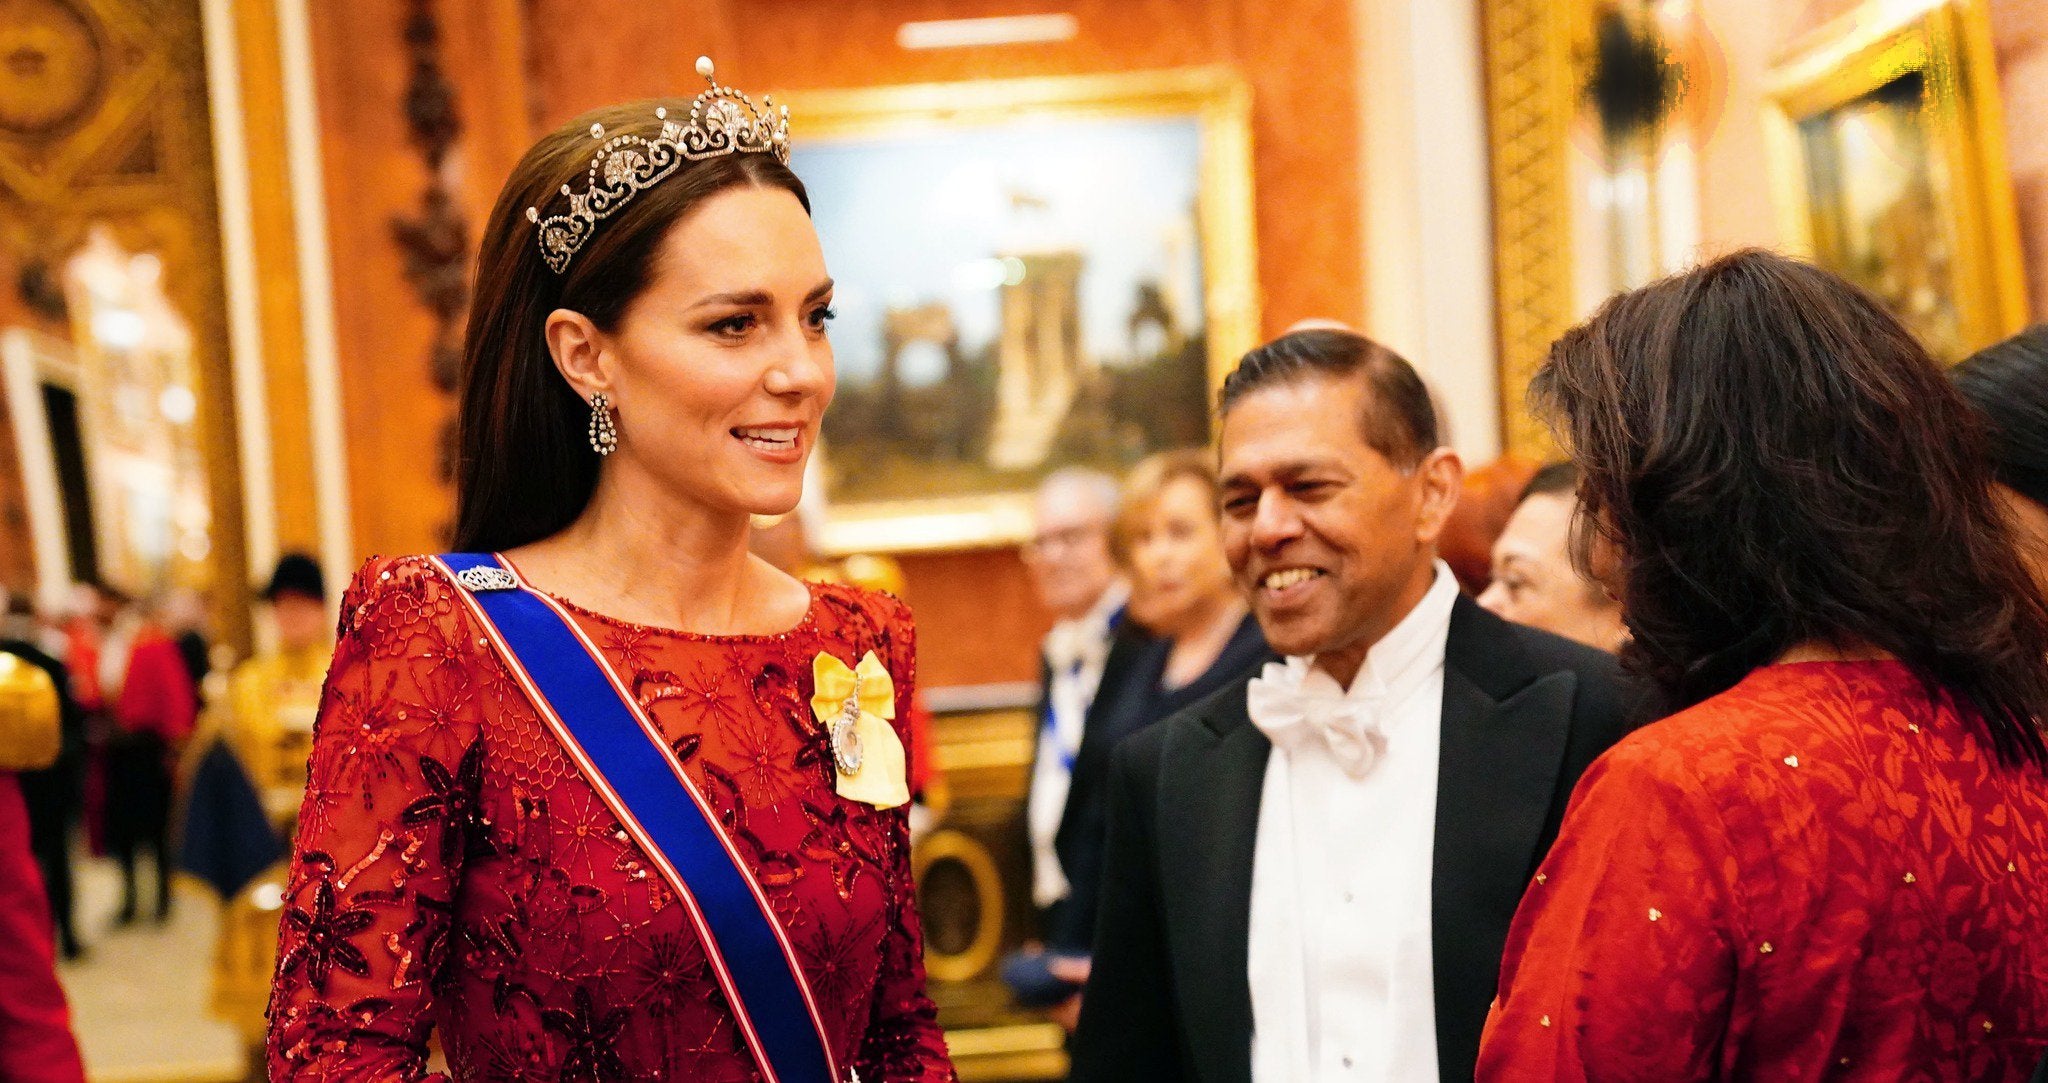 The Most Expensive Royal Jewel That Kate Middleton Will Never Wear - DSF Antique Jewelry